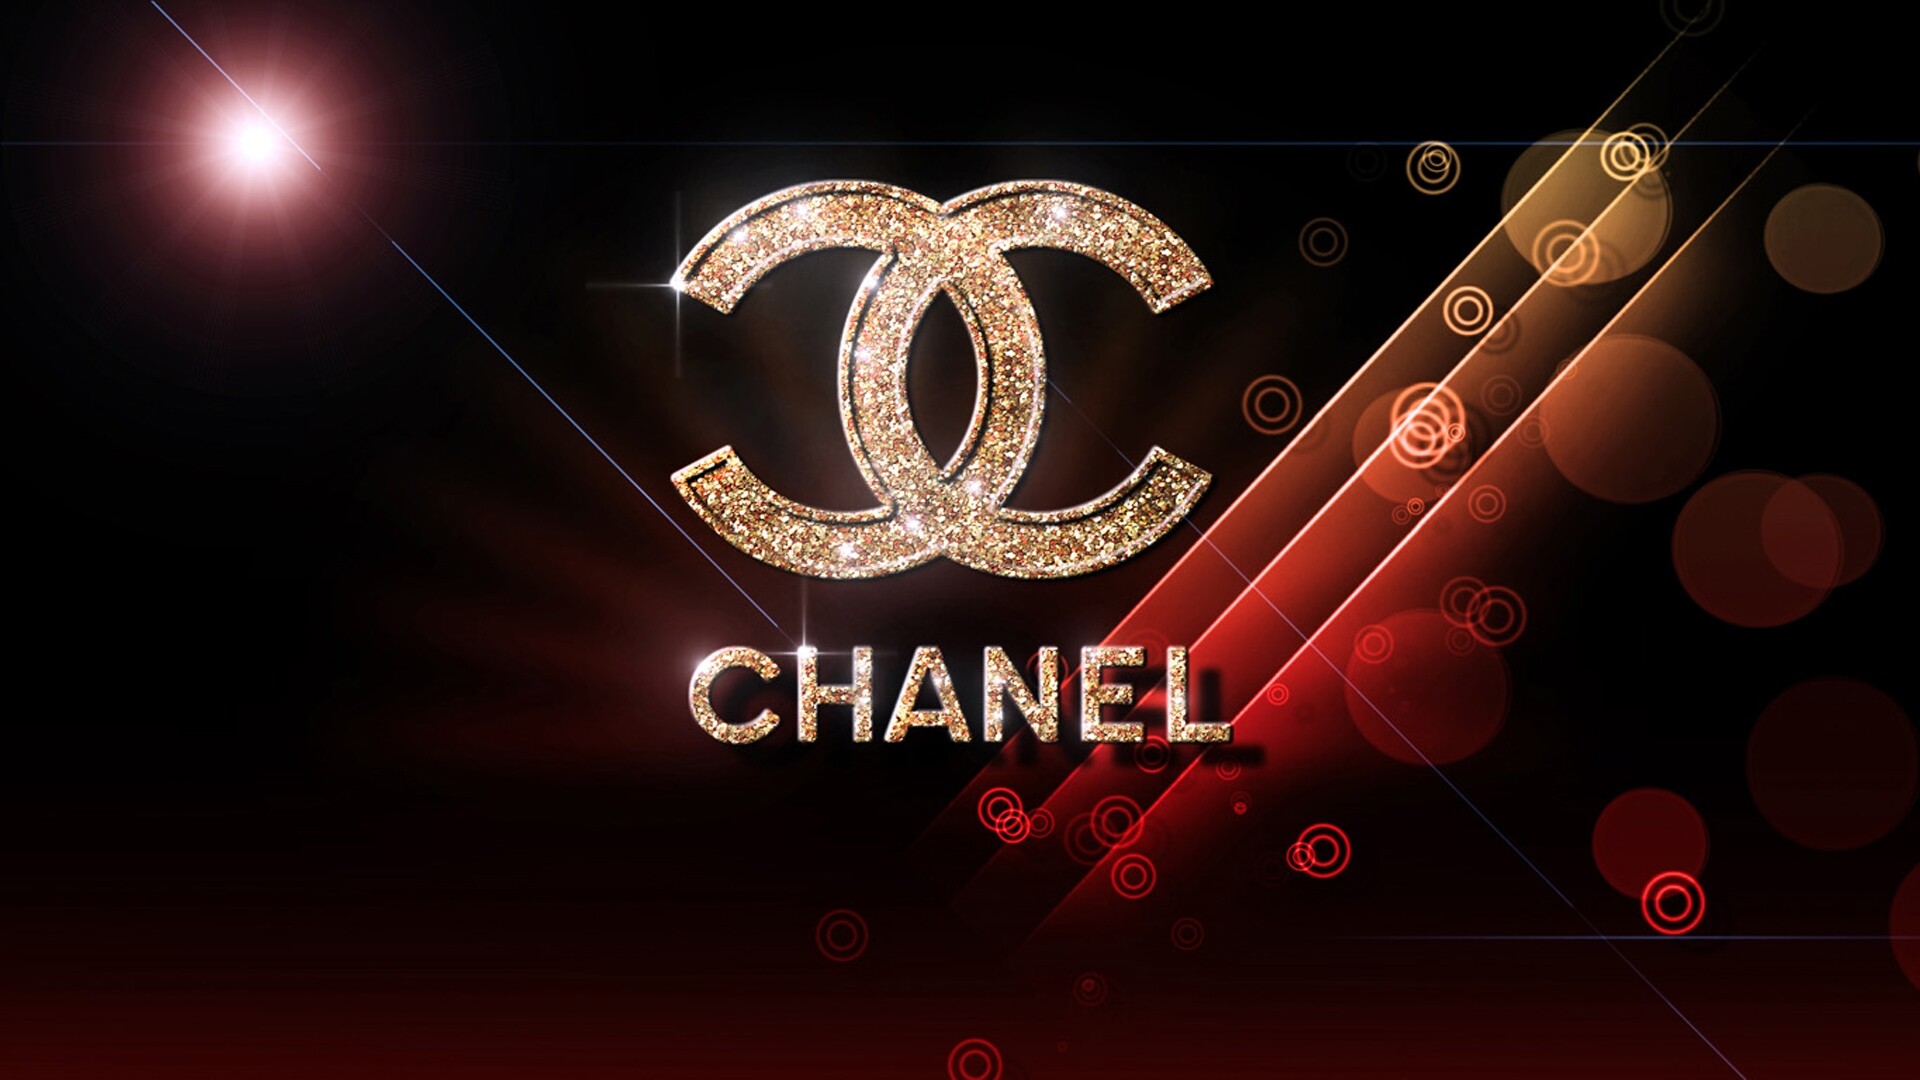 Chanel: Focuses on women's ready-to-wear clothes, luxury goods, and accessories. 1920x1080 Full HD Background.